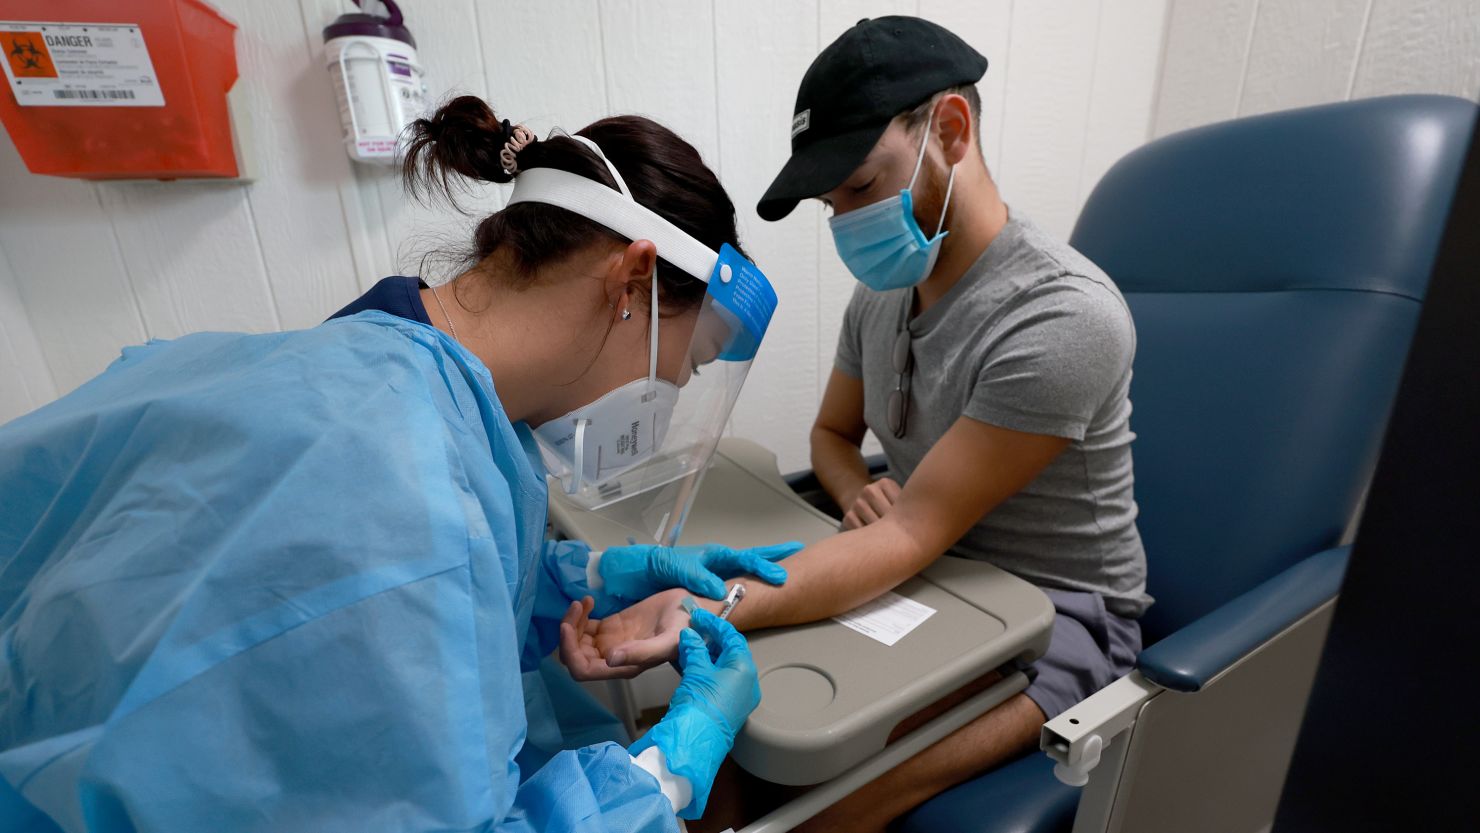 Patricia Pico, a registered nurse, administers an intradermal monkeypox vaccine to Anthony E. Verges at a vaccination site setup in Tropical Park by Miami-Dade County and Nomi Health on August 15, 2022, in Miami, Florida. (Photo by Joe Raedle/Getty Images)